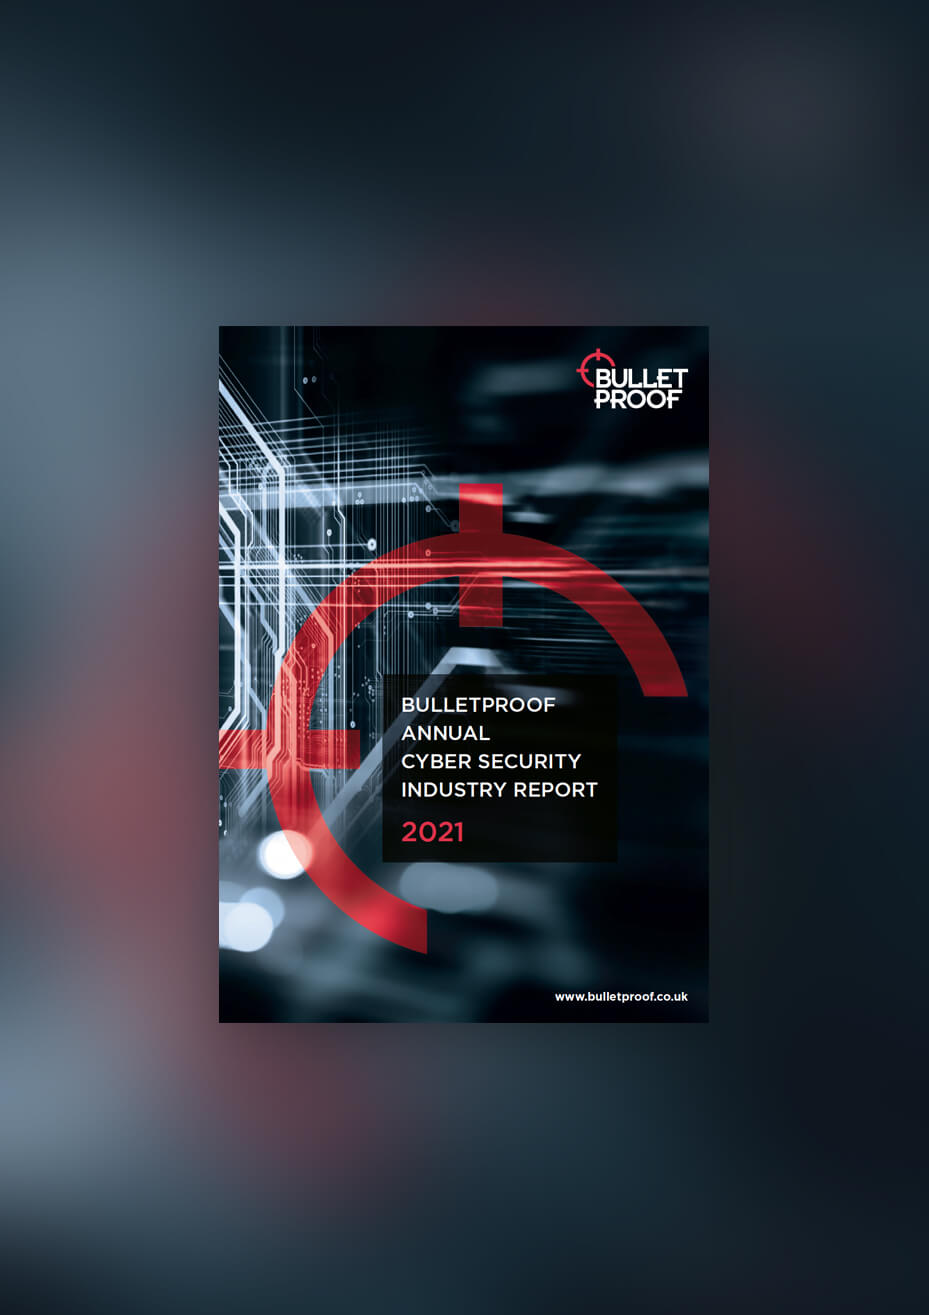 Bulletproof Annual Cyber Security Industry Report 2021